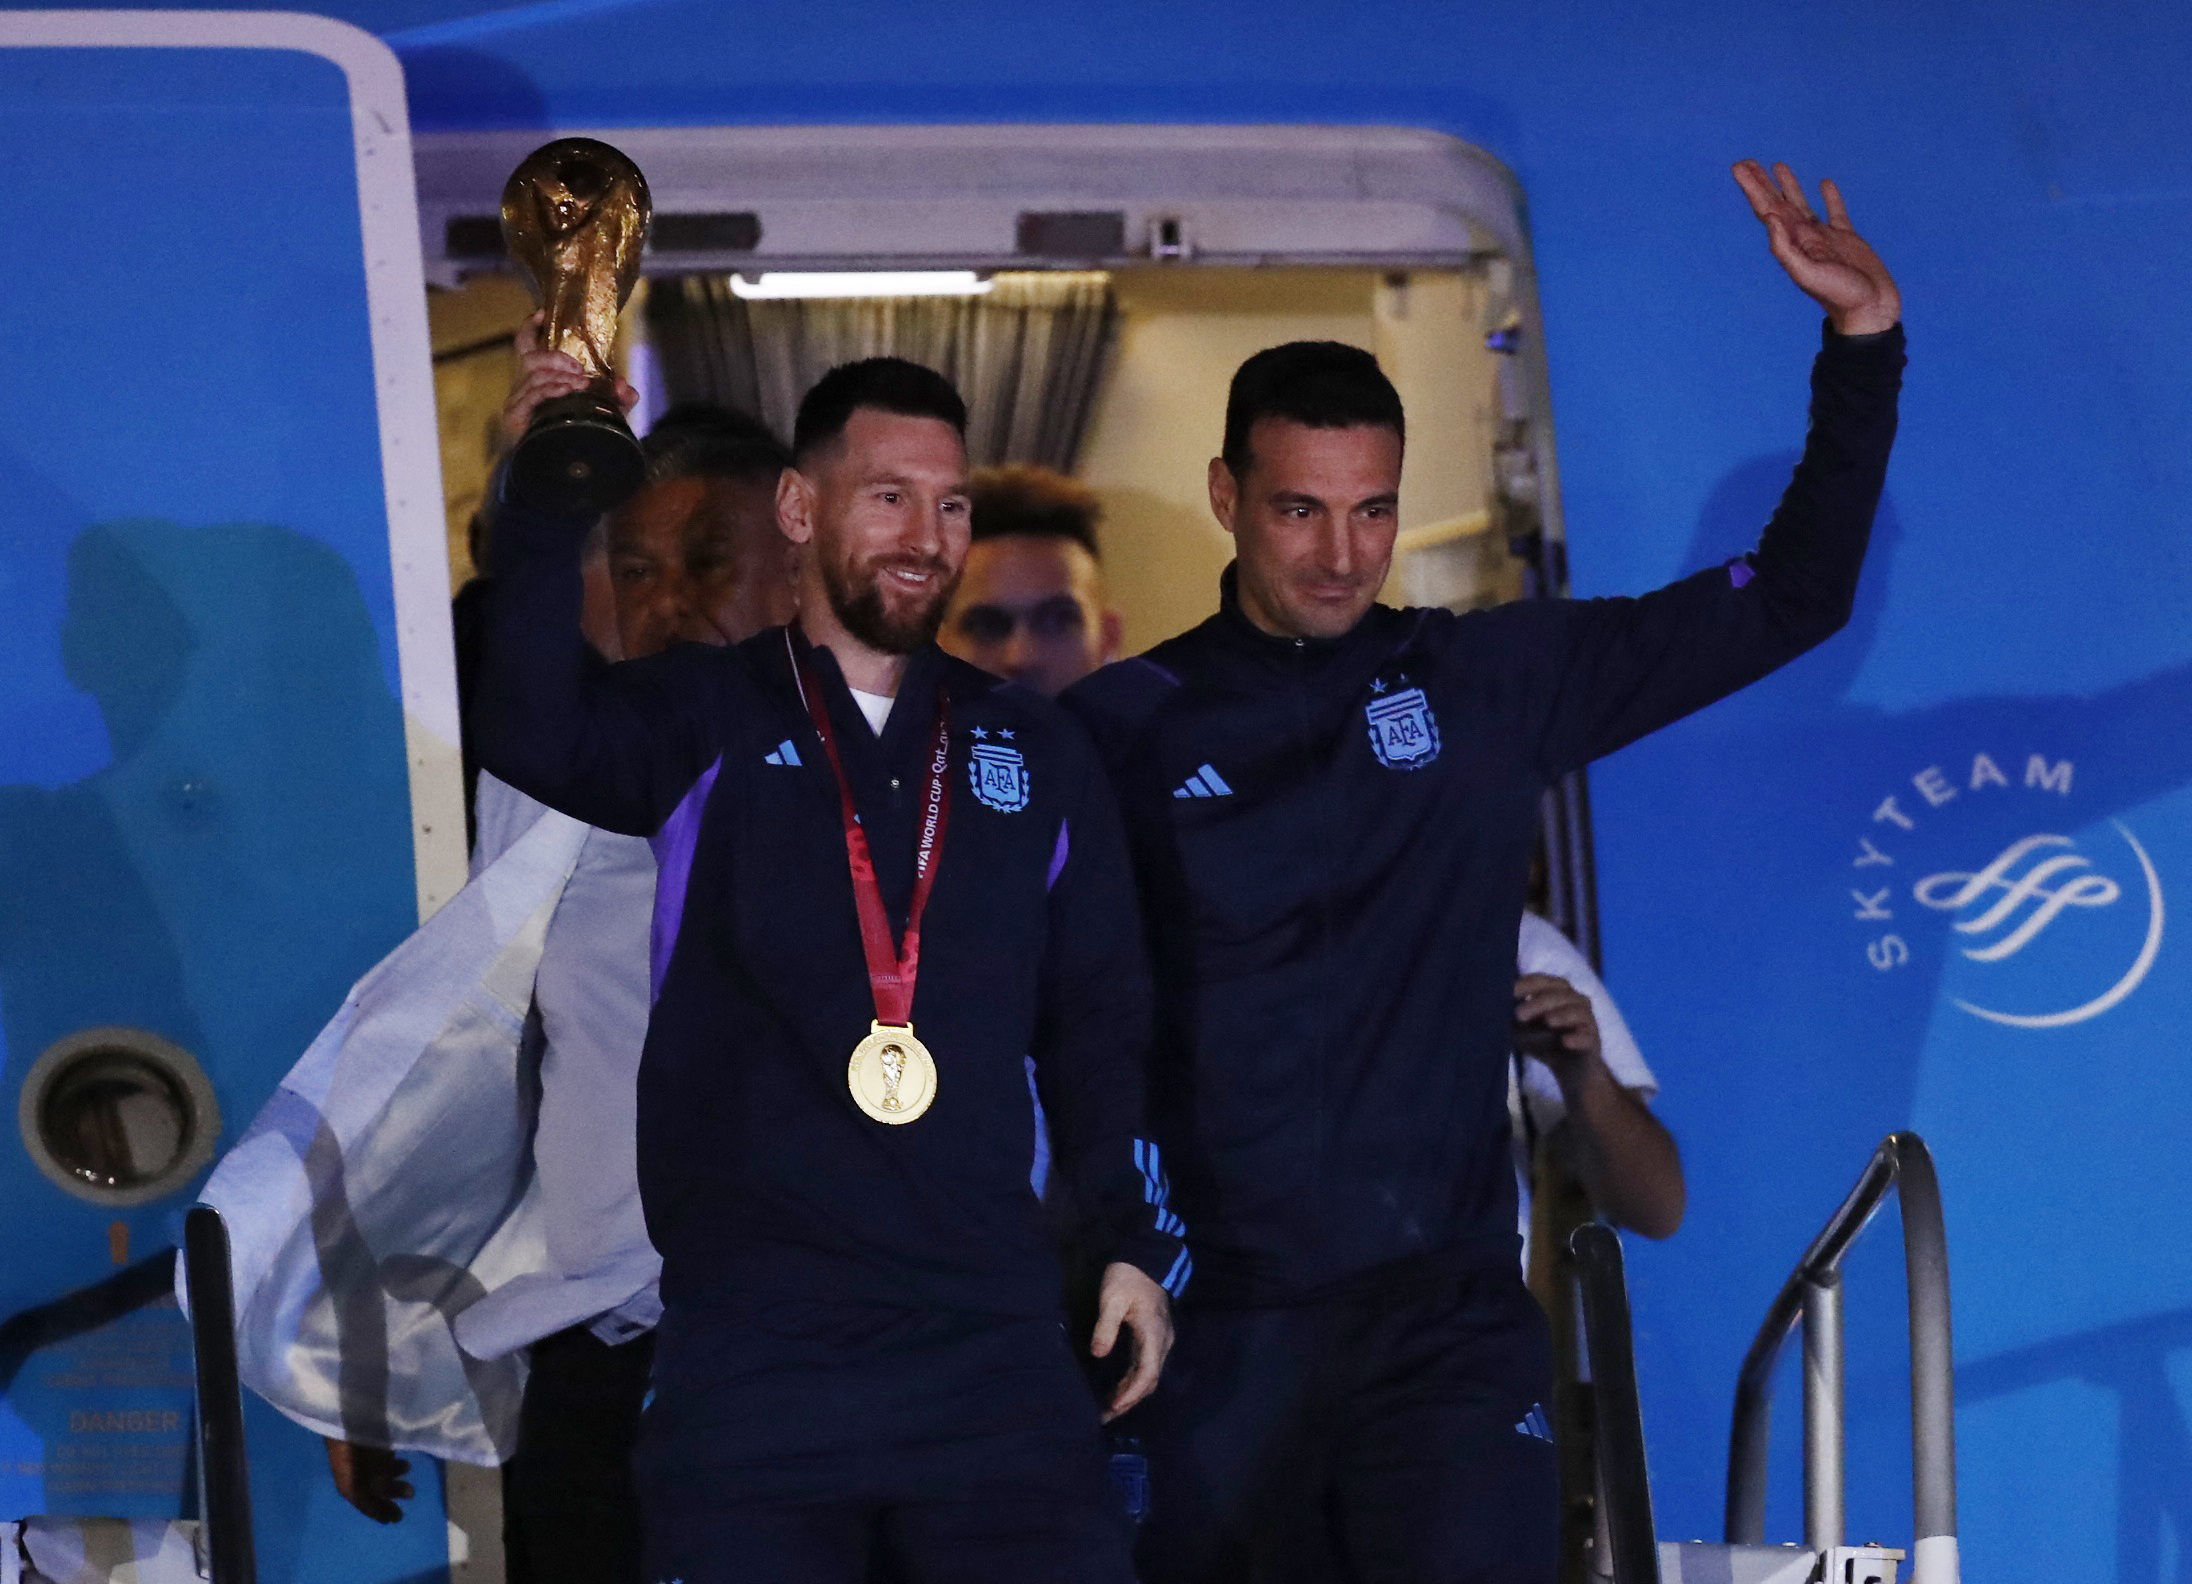 Soccer Football - Argentina team arrives to Buenos Aires after winning the World Cup  - Buenos Aires, Argentina - December 20, 2022 Argentina coach Leonel Scaloni and  Lionel Messi with the trophy during the team's arrival at Ezeiza International Airport REUTERS/Agustin Marcarian